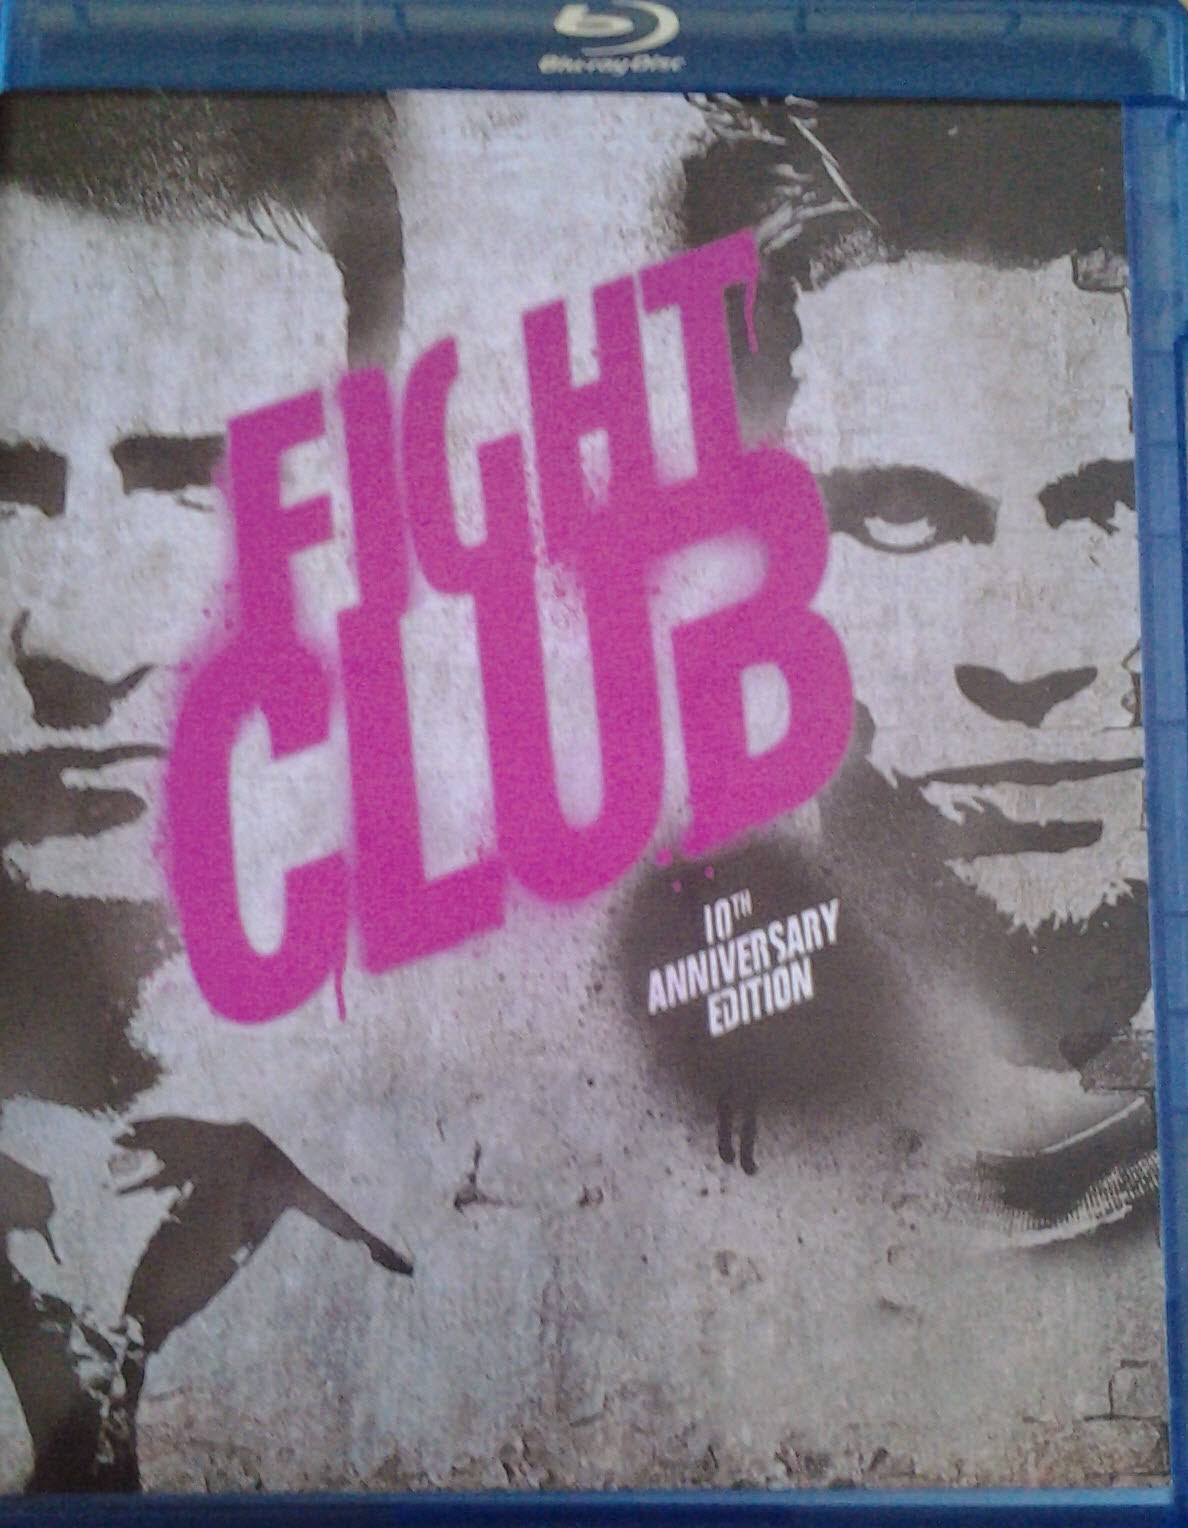 DVD Cover - Fight Club